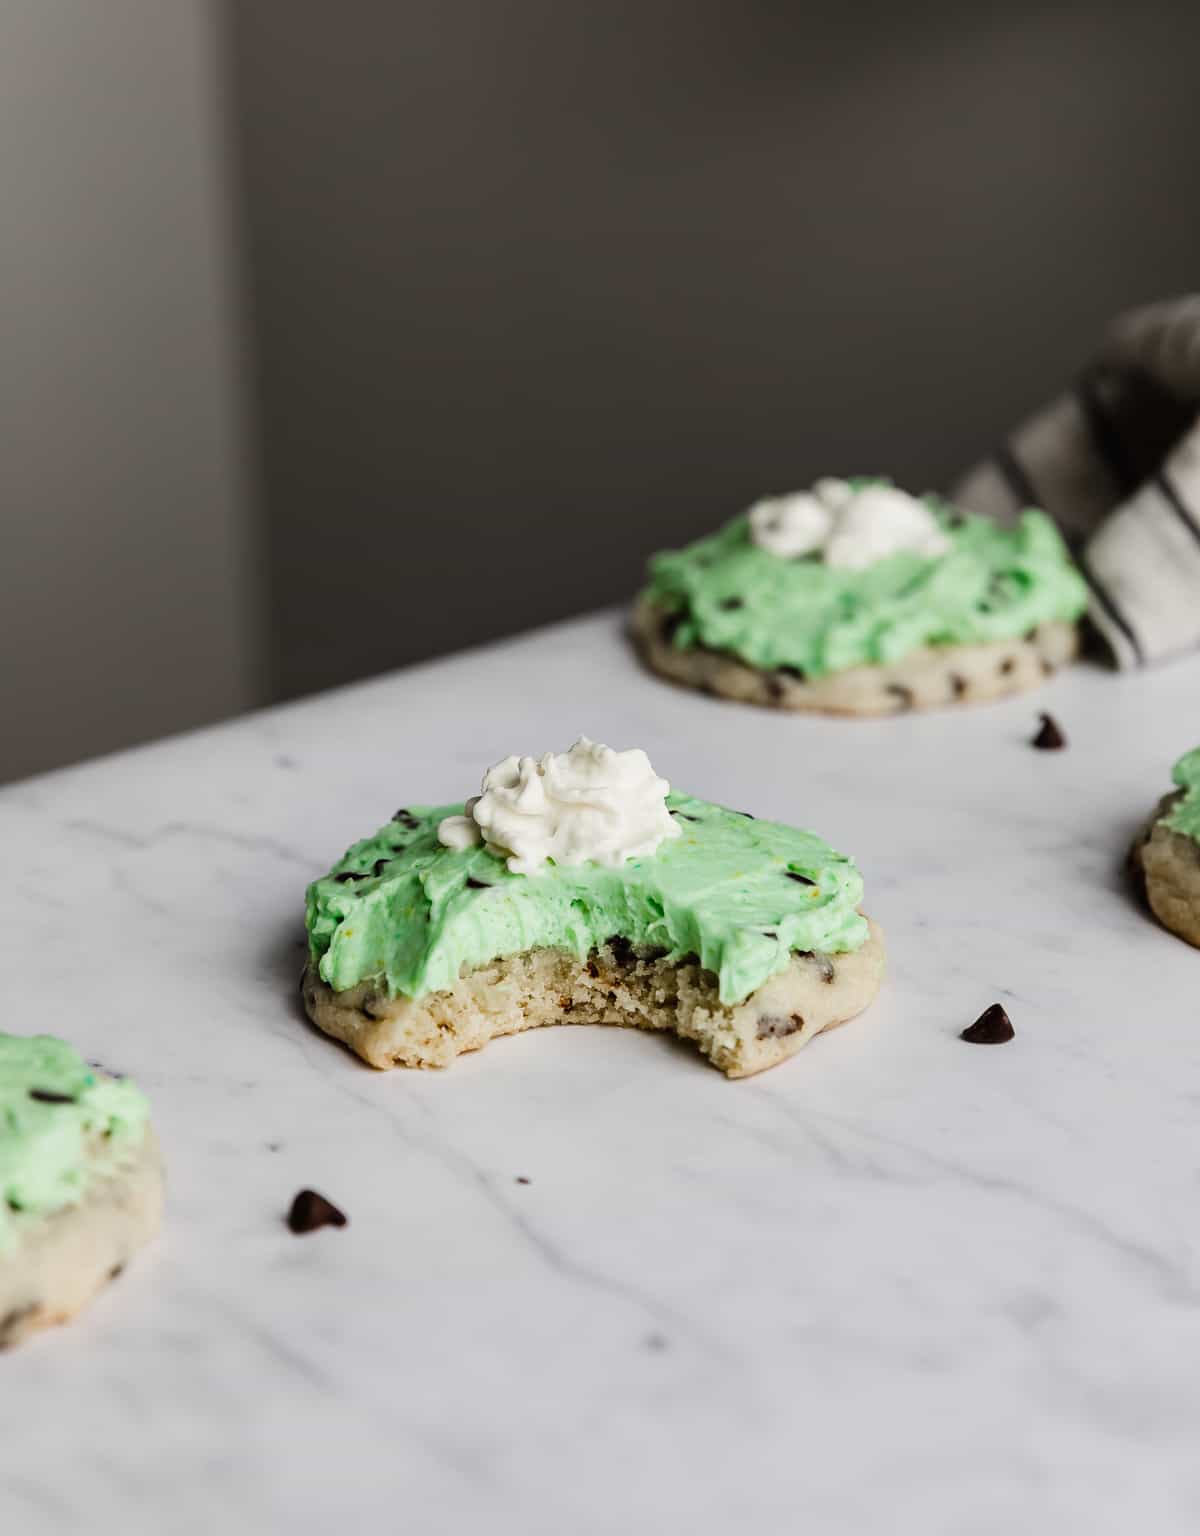 A Crumbl Mint Chip Ice Cream Cookie topped with a green frosting and dollop of whip cream on a white marble table.